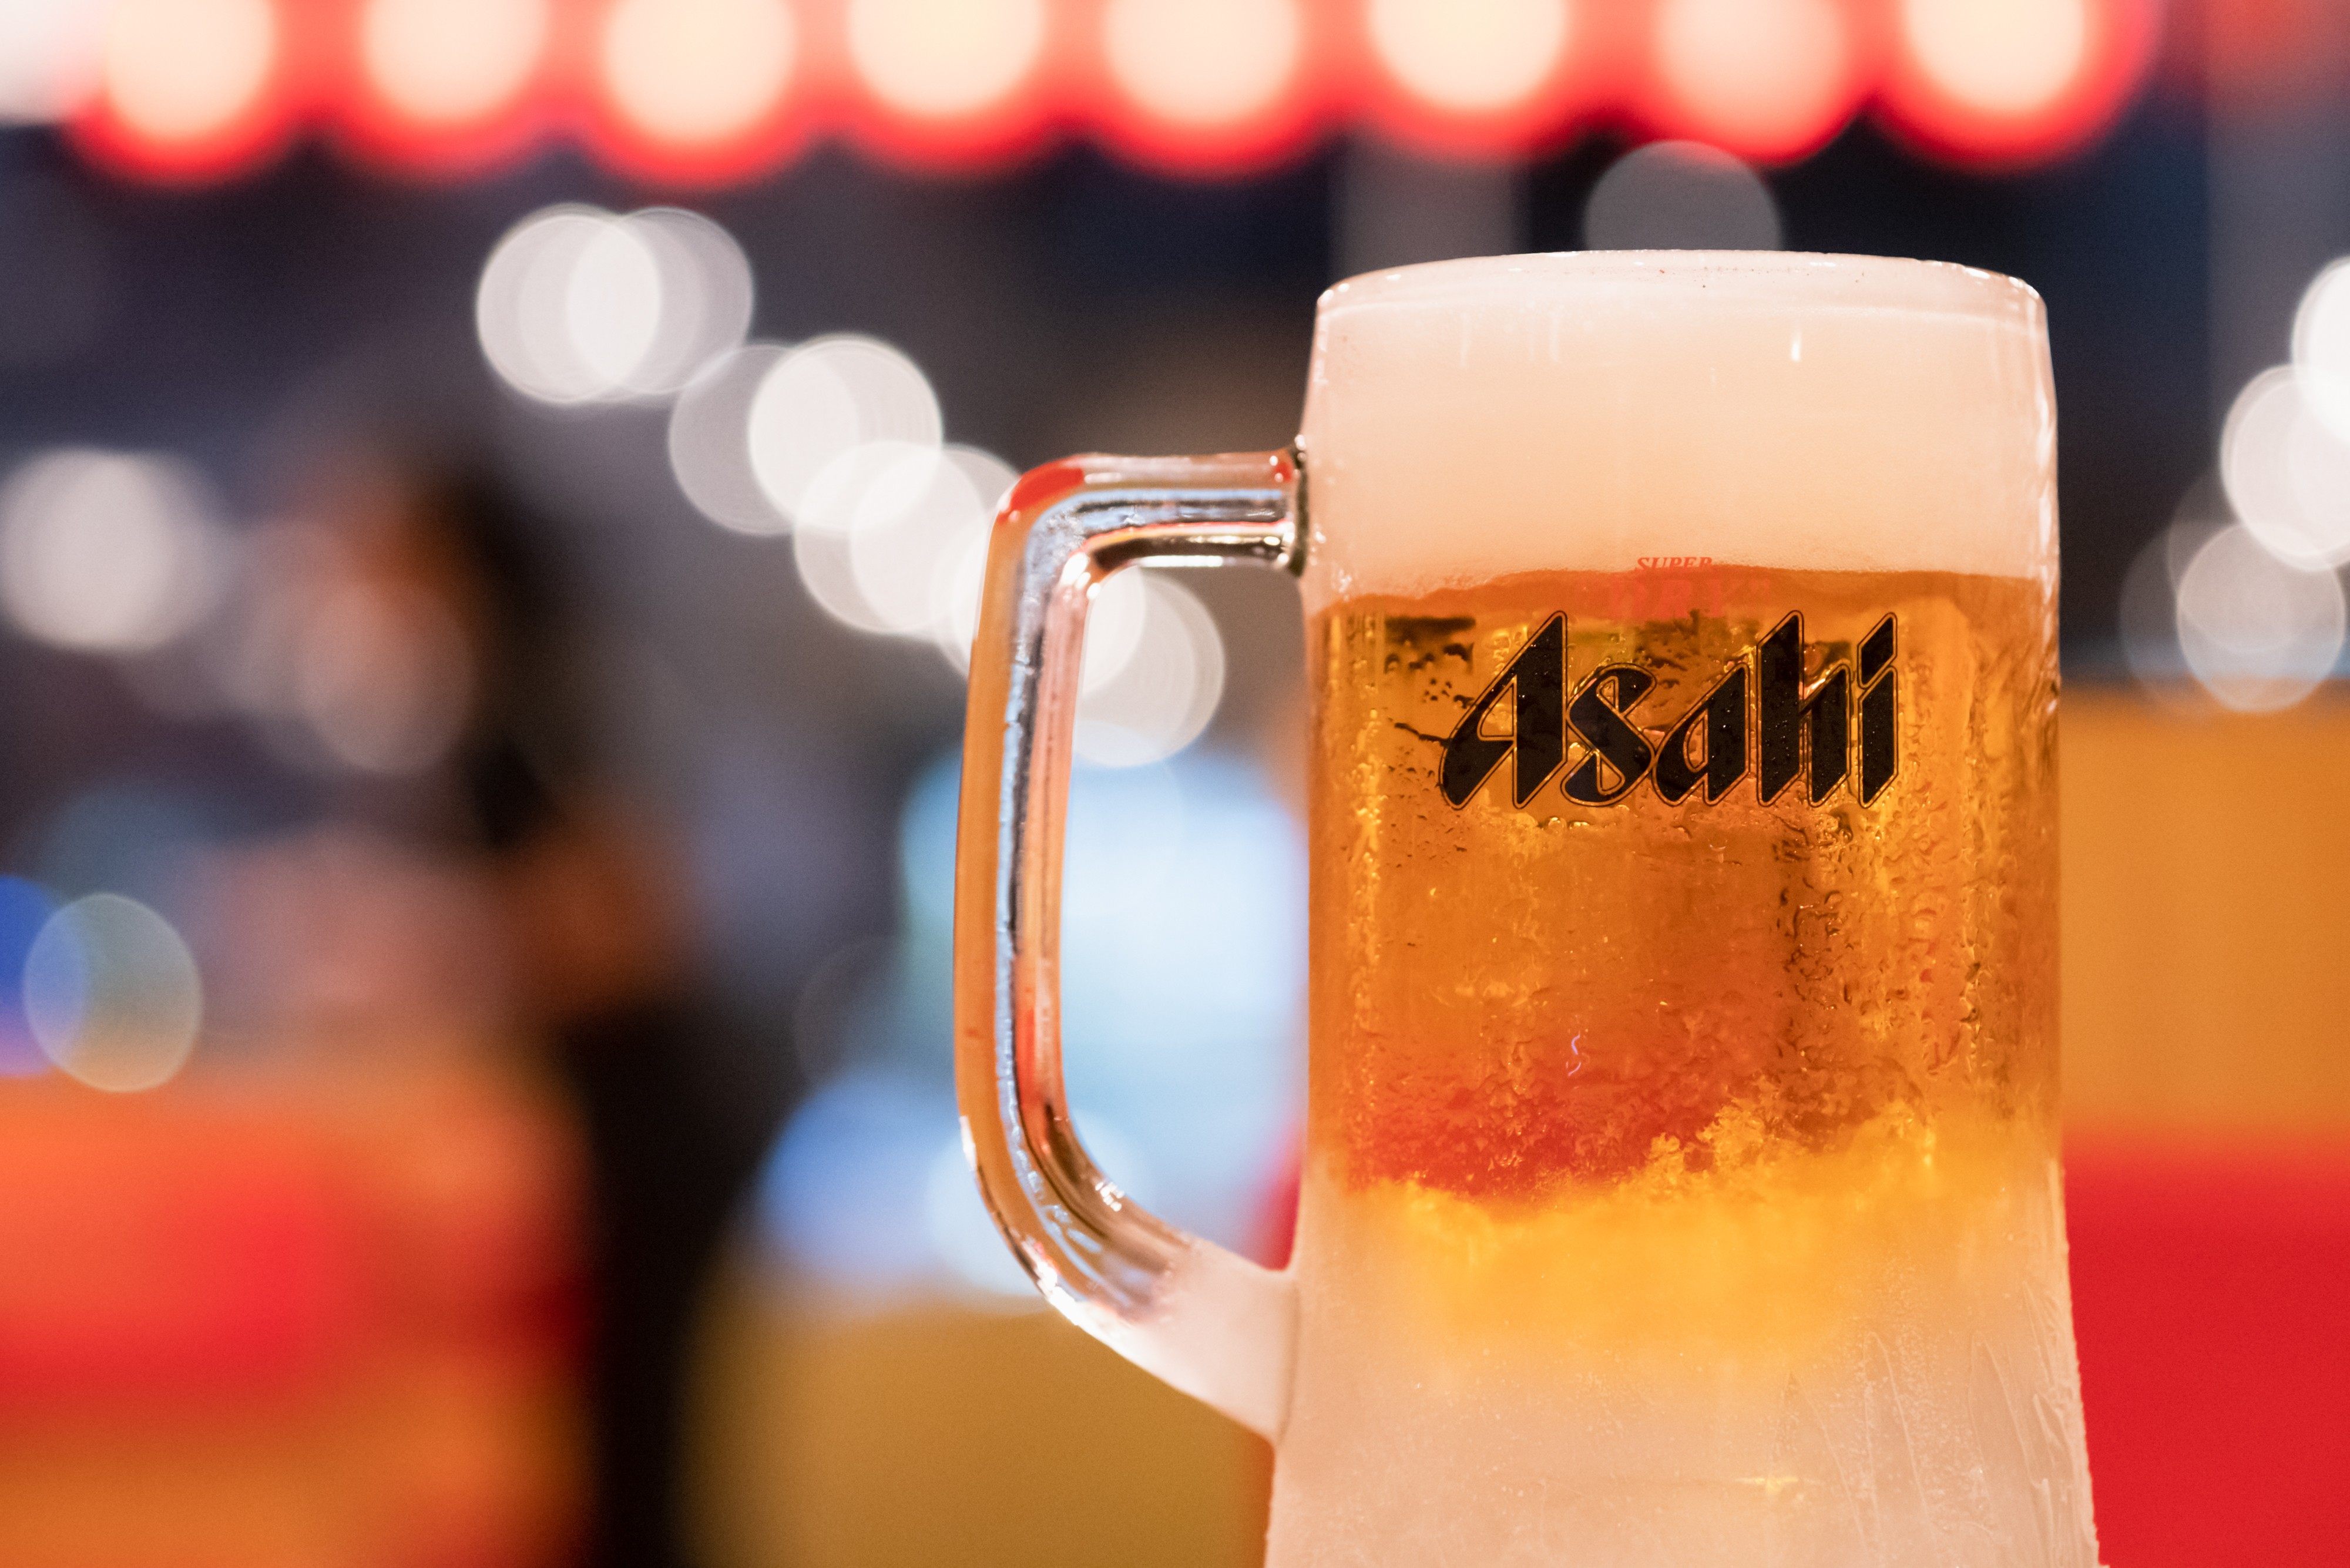 Japanese brewers such as Asahi and Kirin are once again dominating the imported beer market in South Korea. Photo: Shutterstock